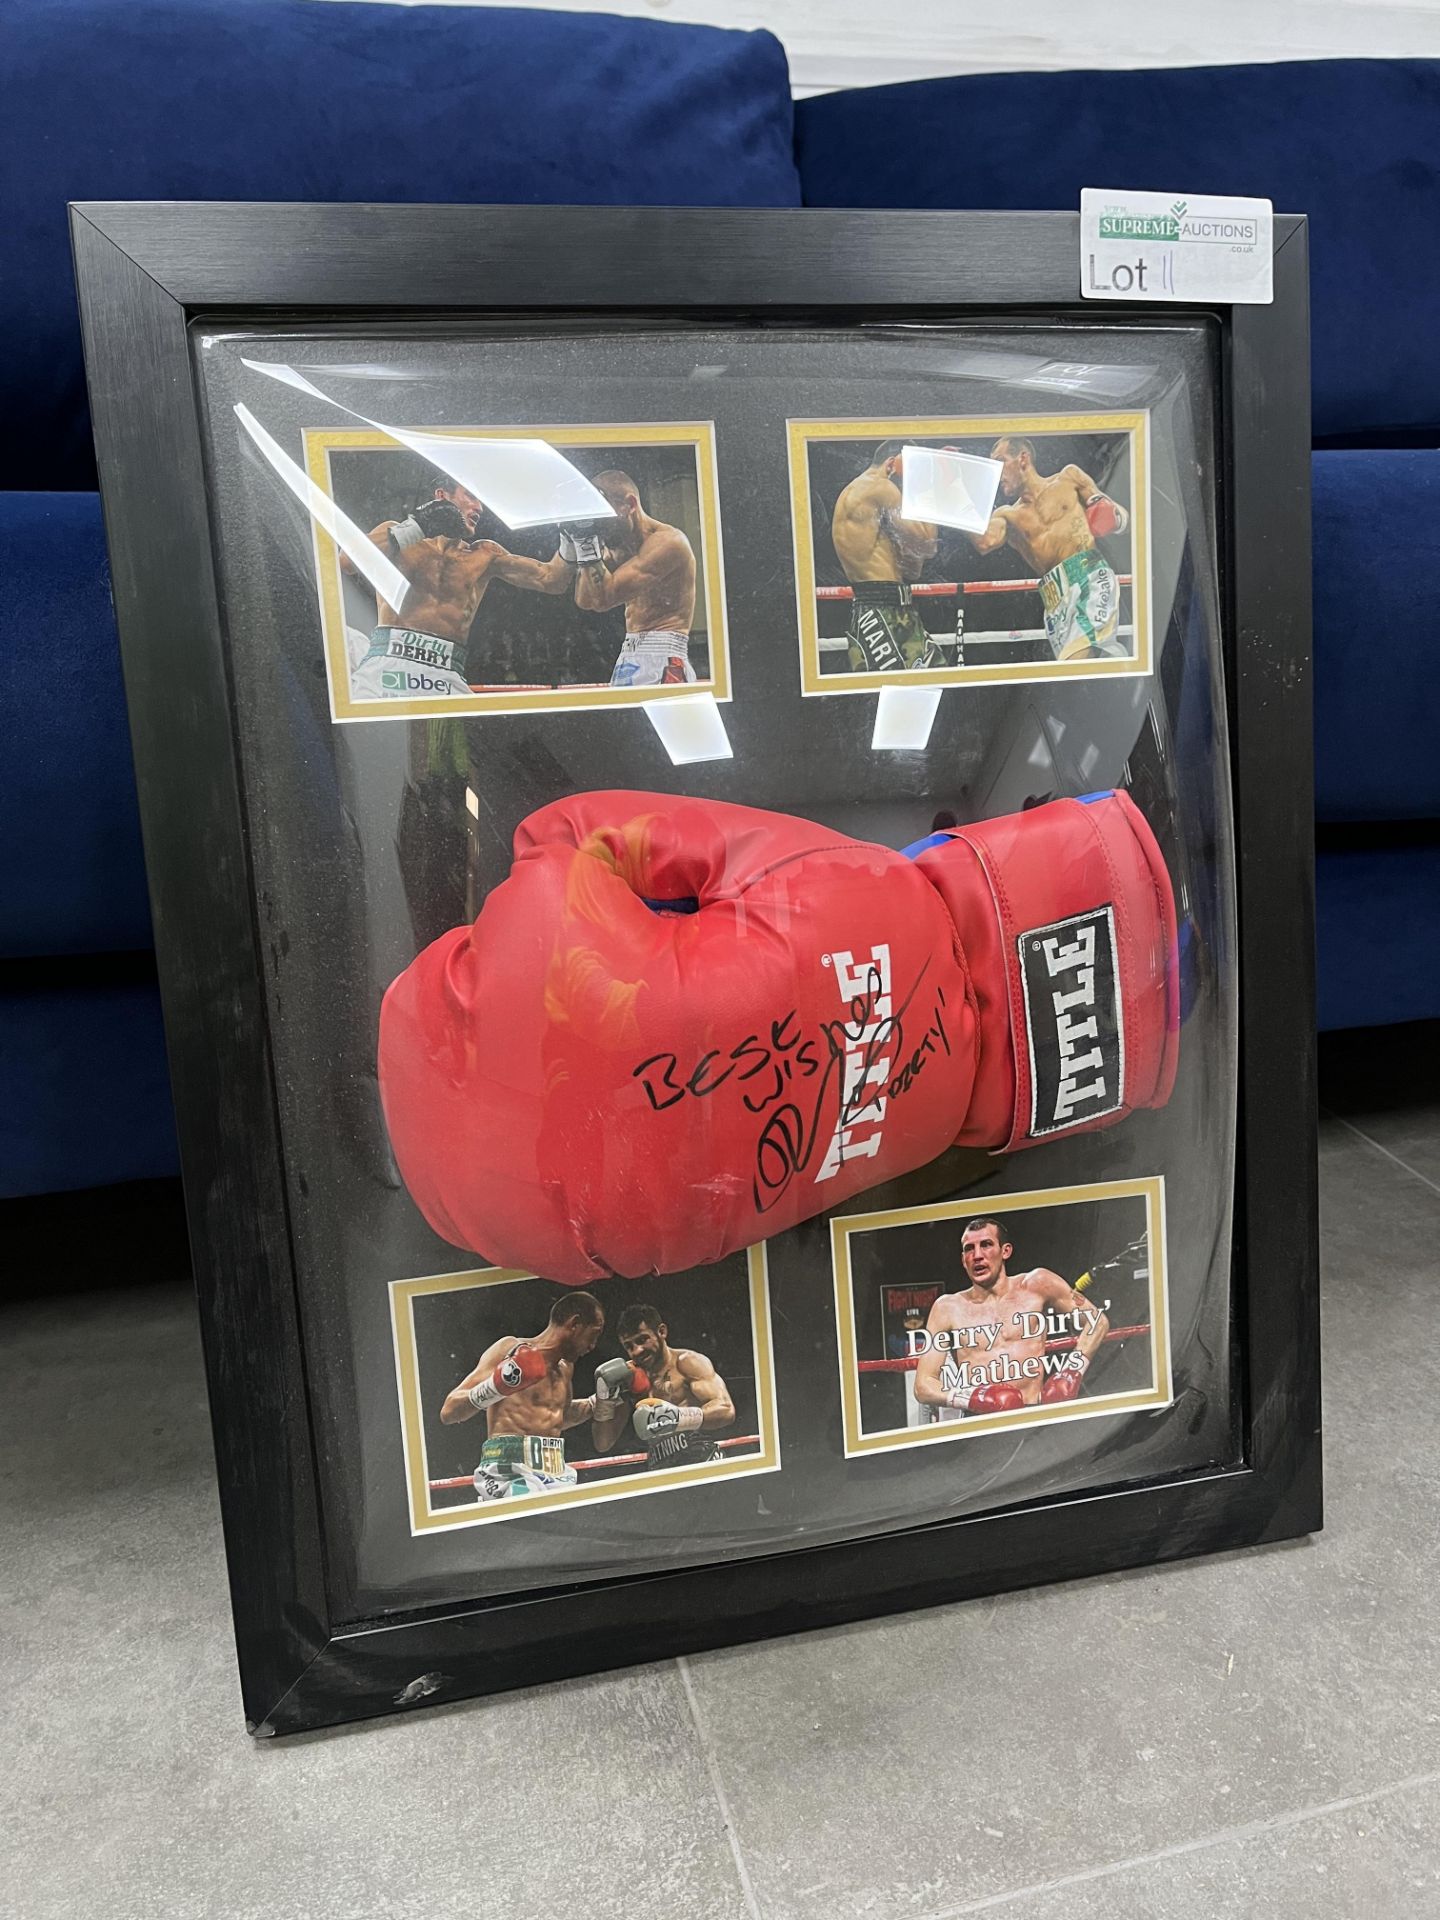 SIGNED FRAMED BOXING GLOVE OF DERRY MATTHEWS WITH CERTIFICATE OF AUTHENTICITY